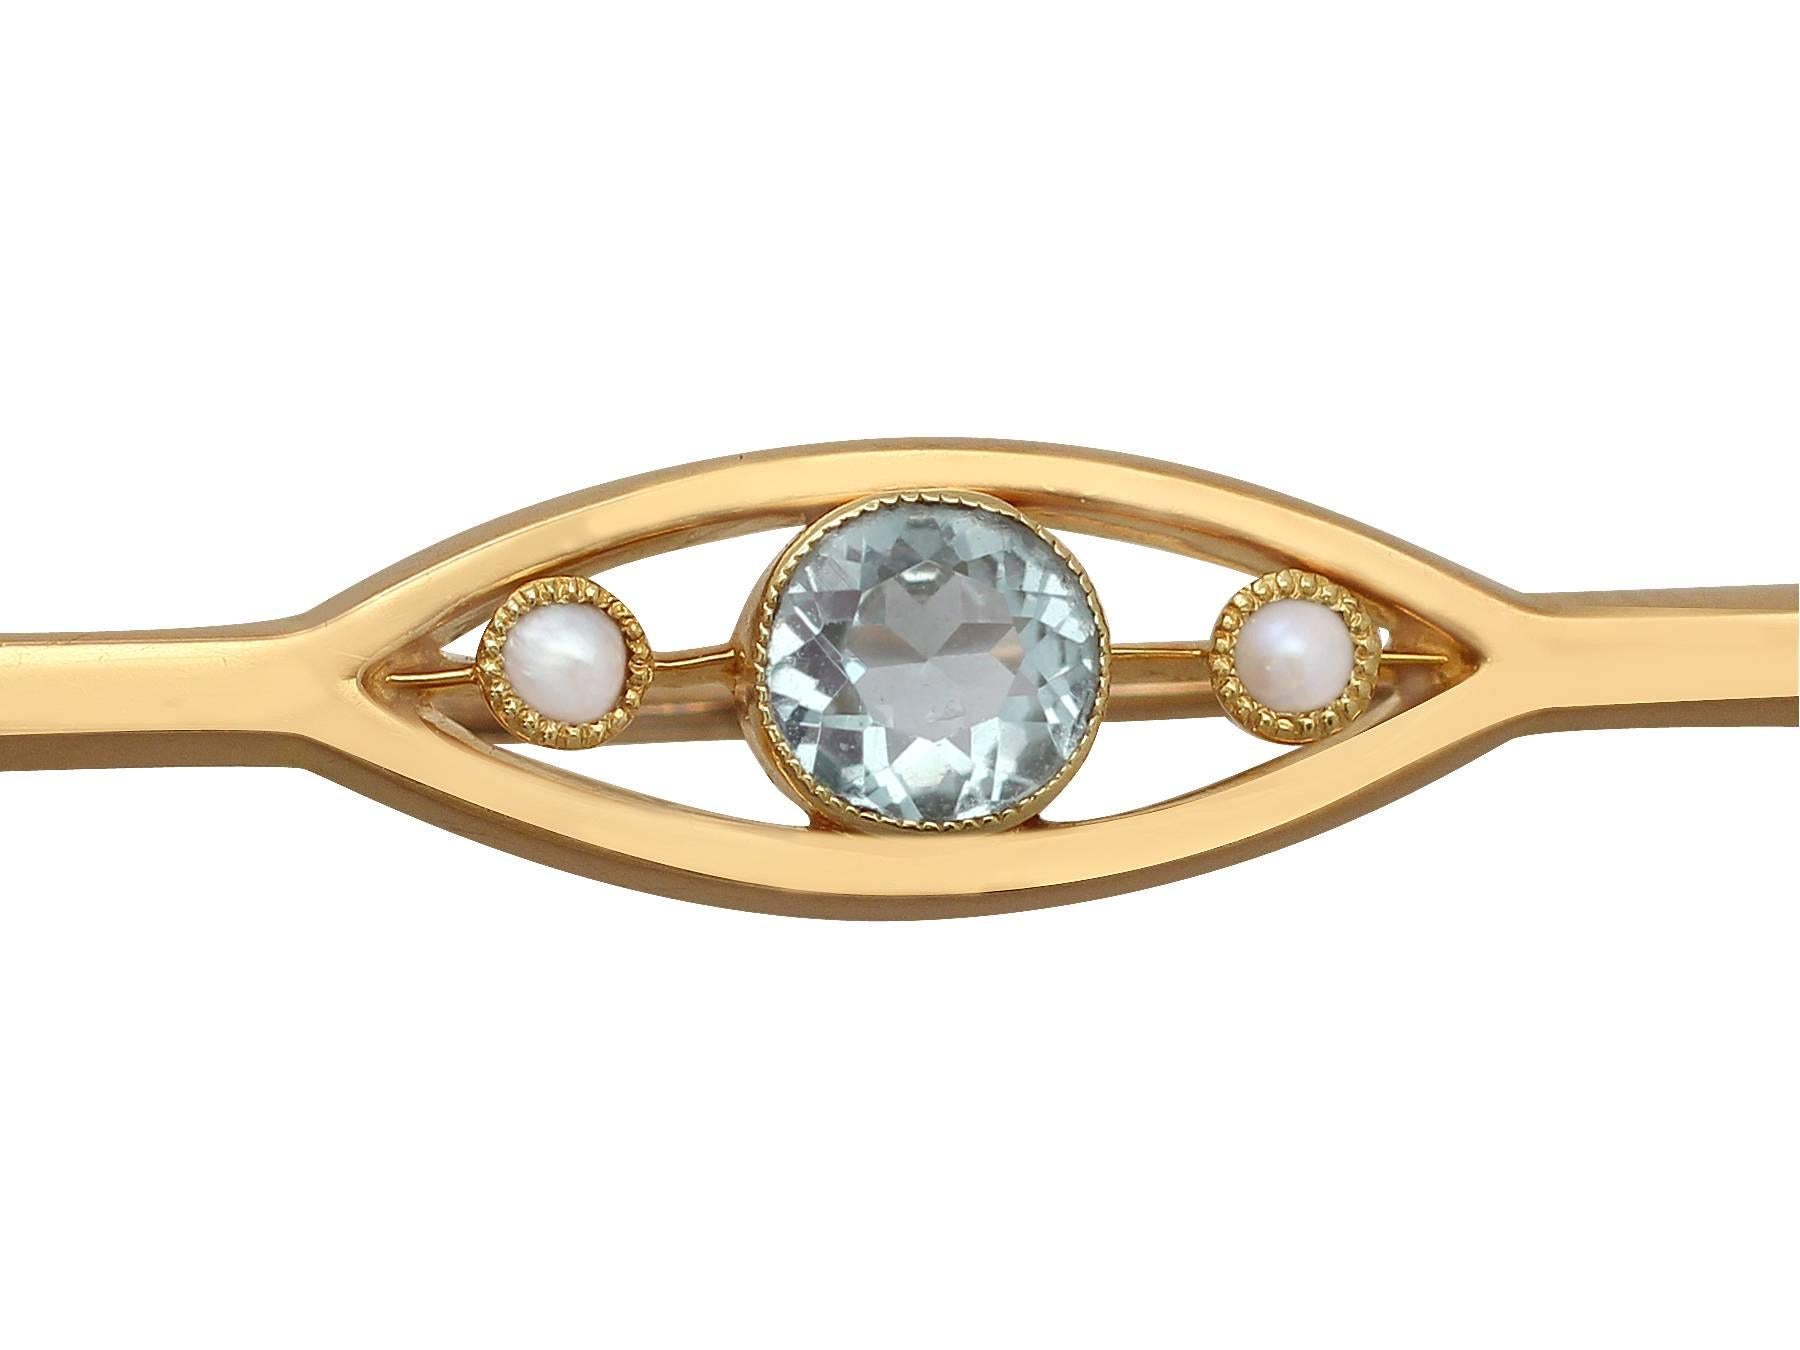 A fine and impressive antique 0.47 carat natural aquamarine and seed pearl, 15 karat yellow gold brooch; part of our gemstone brooch collection

This fine antique aquamarine brooch has been crafted in 15k yellow gold.

The bar brooch features a